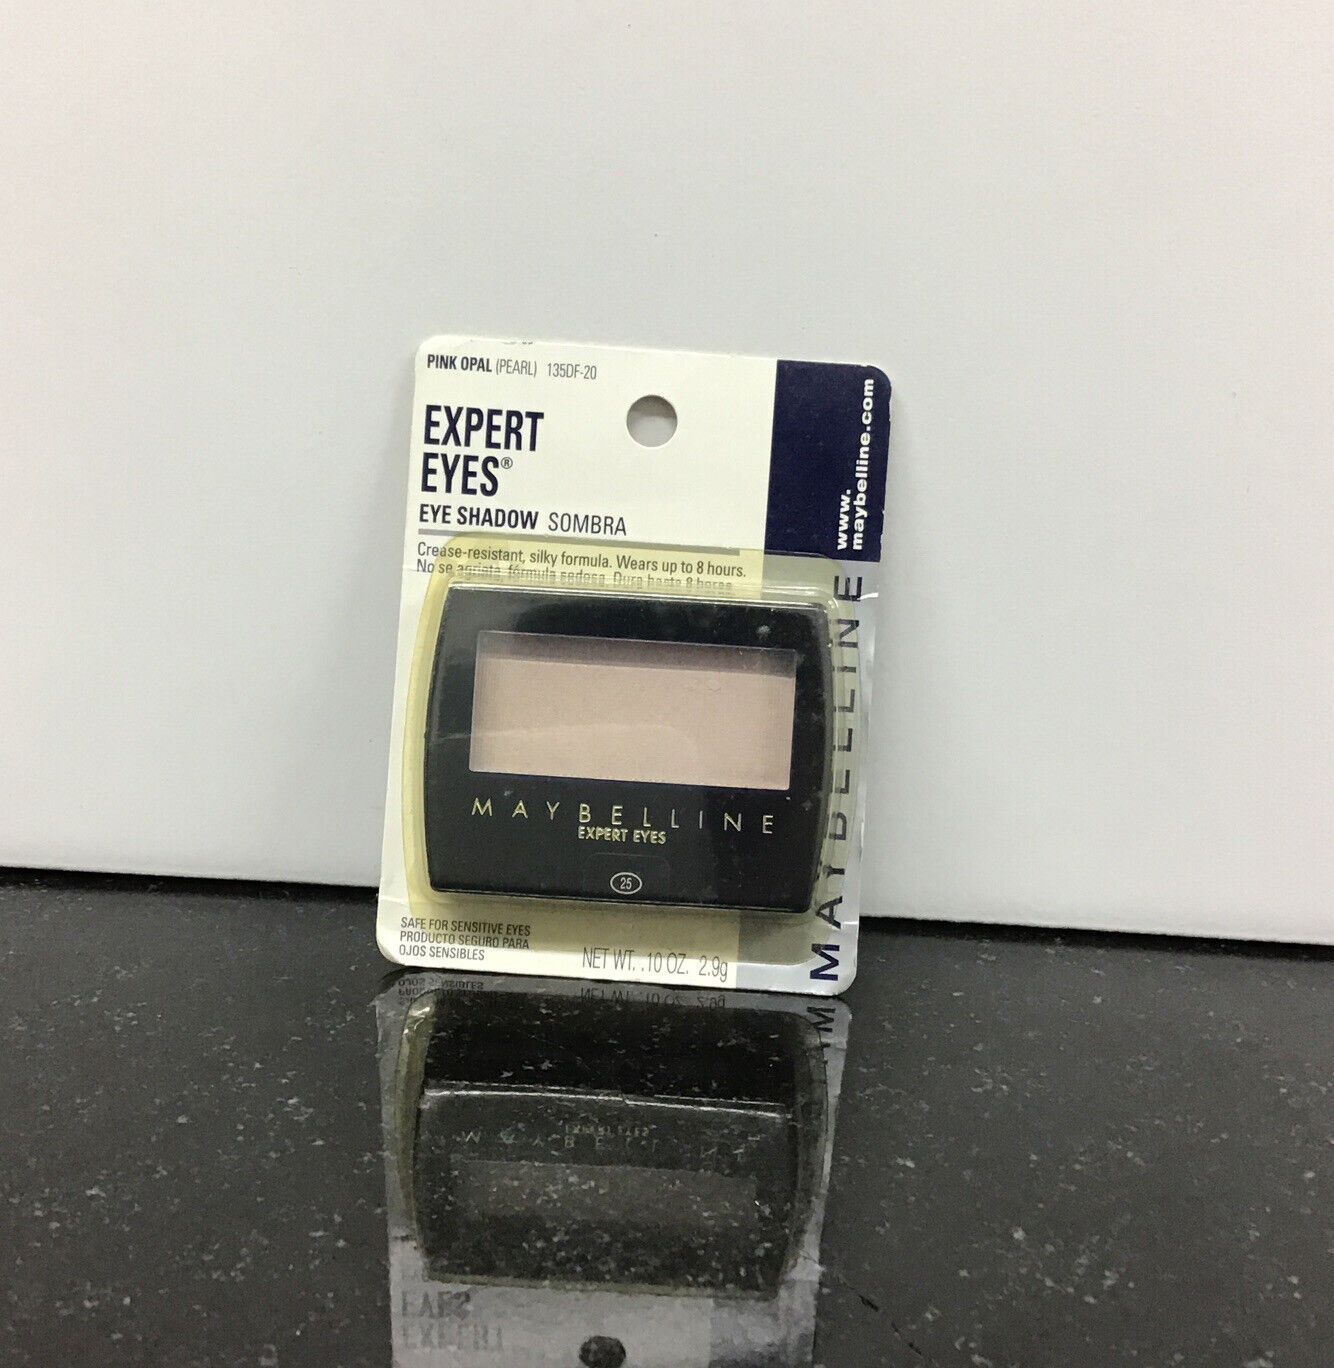 Expert eyes by Maybelline eye shadow *PINK OPAL 25, As pictured